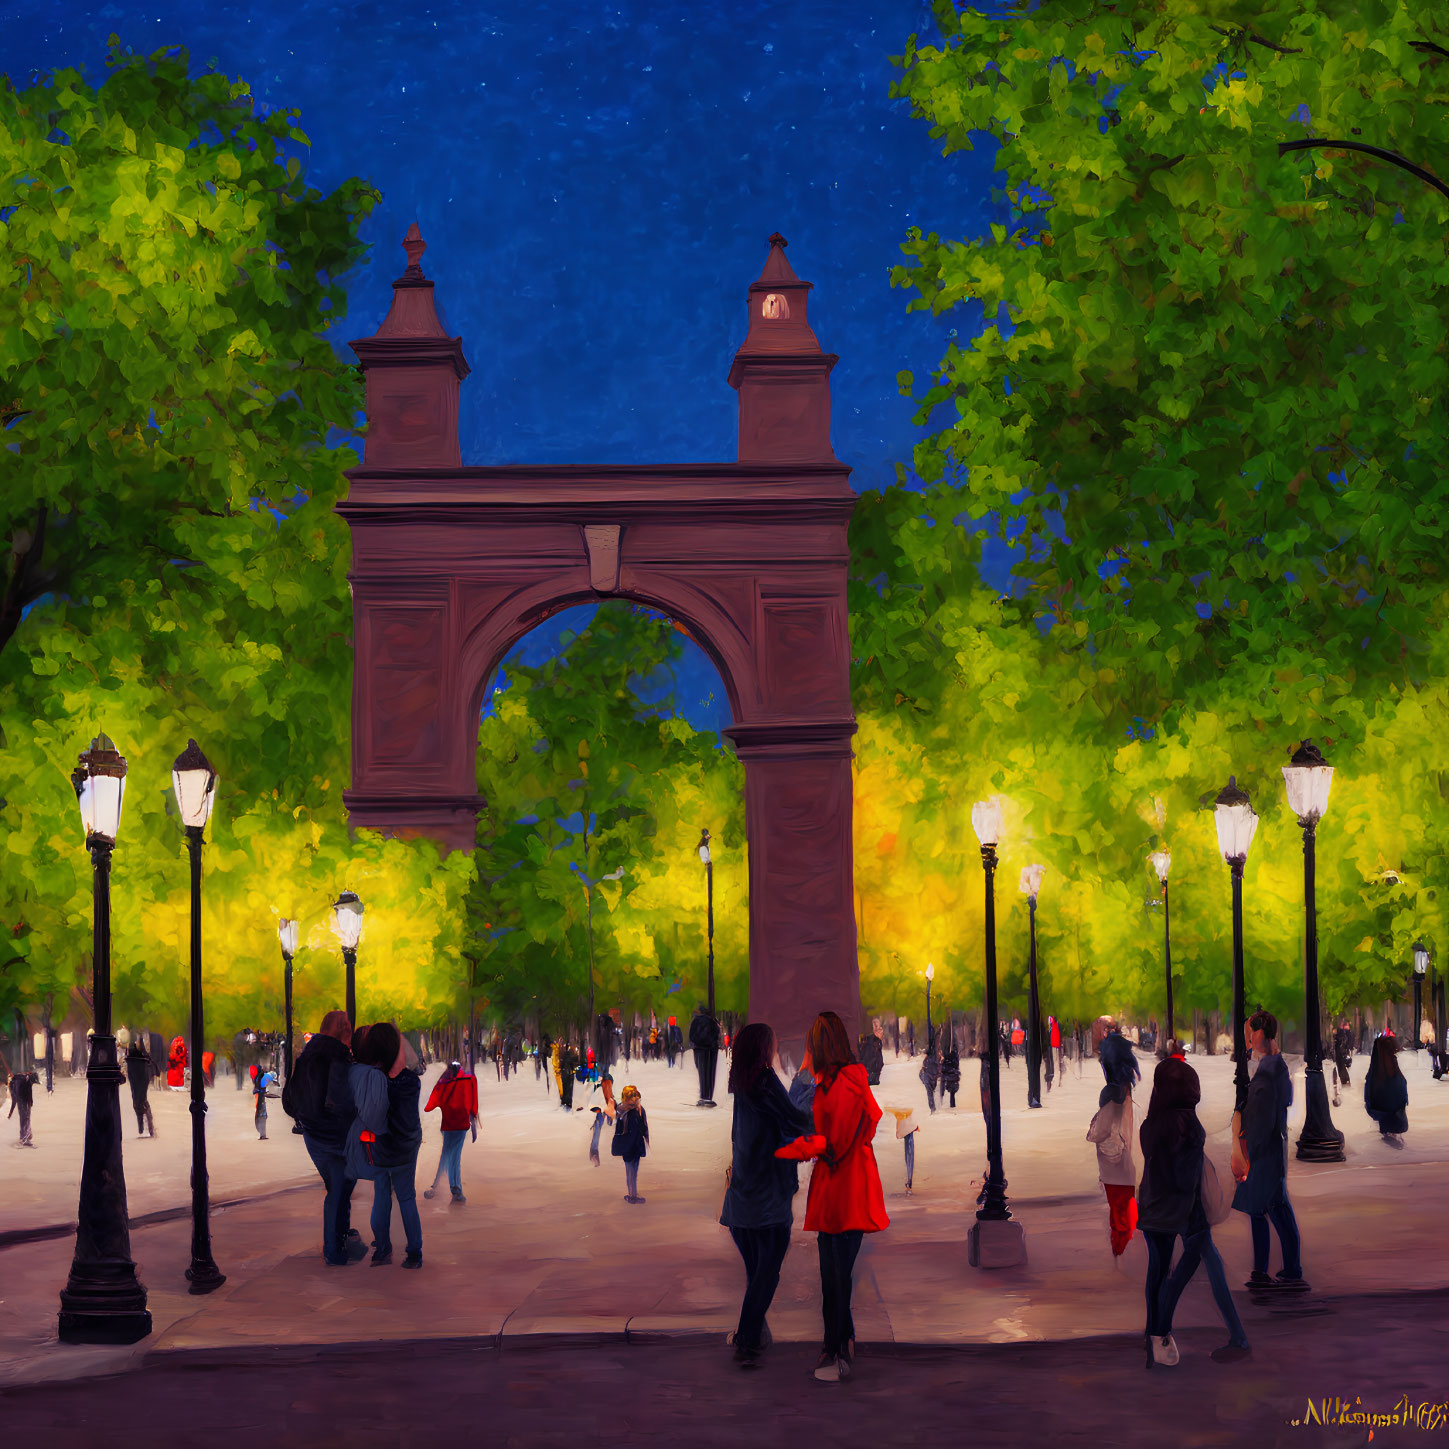 Colorful painting of people in park with green trees, arch, and street lamps